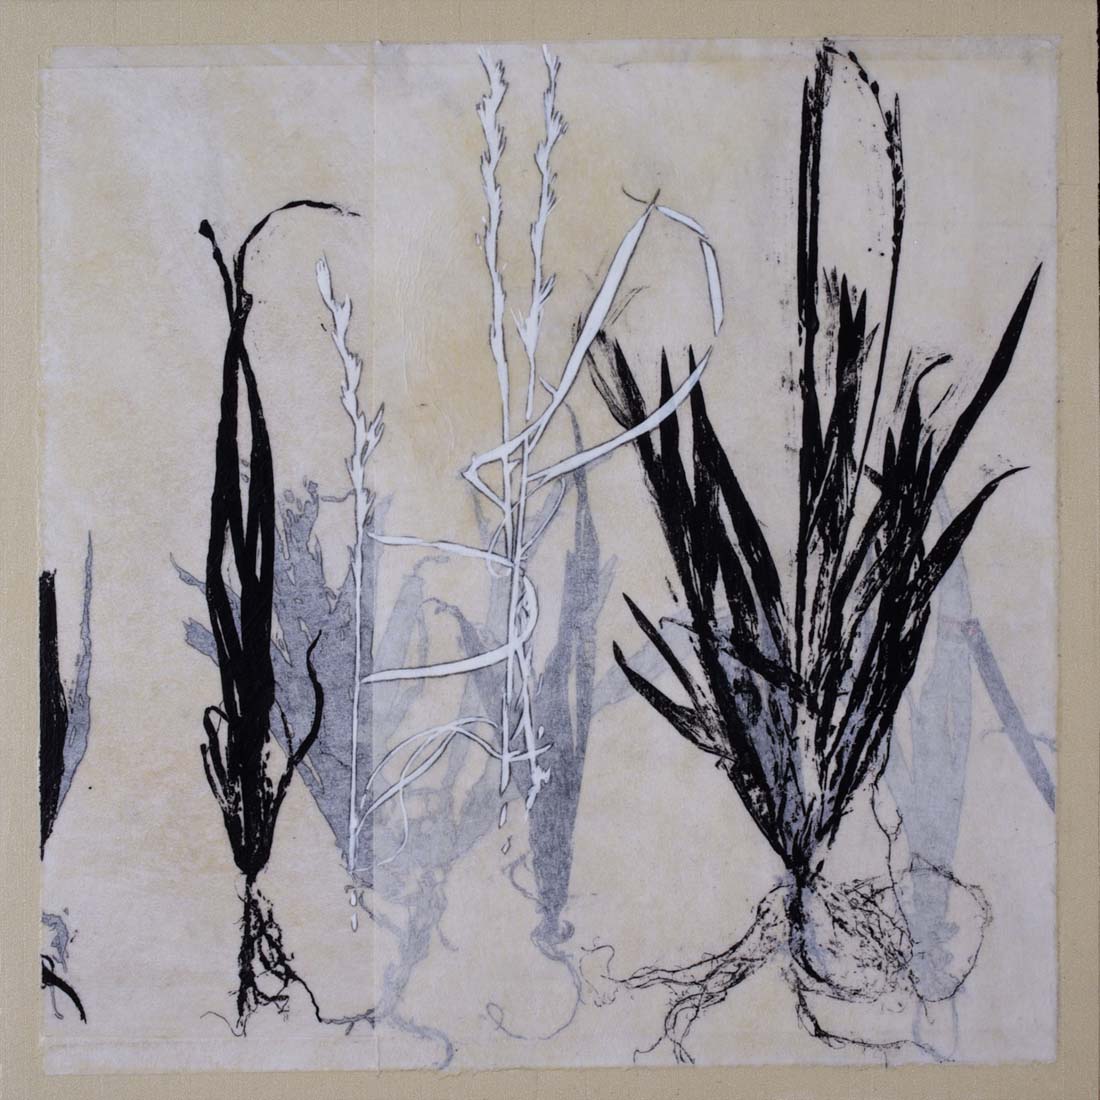 
		                					Karen Kitchel		                																	
																											<i>One Month in June #19,</i>  
																																								2009, 
																																								mixed media on wood panel, 
																																								12 x 12 inches 
																								
		                				